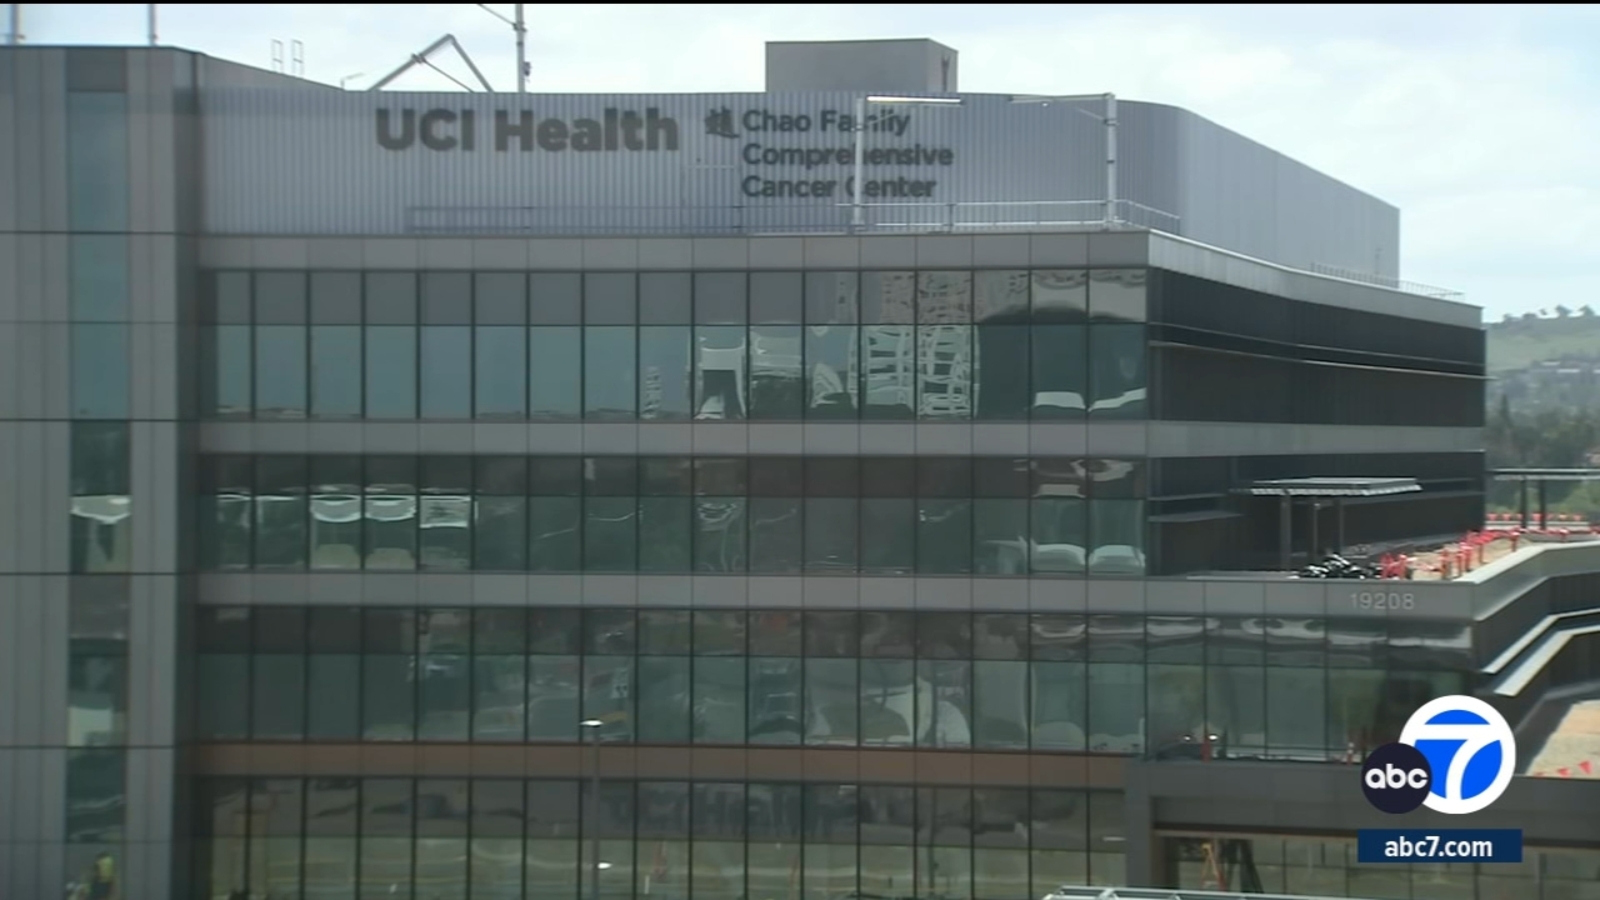 Nation’s 1st all-electric, zero-emission hospital coming to UCI Health medical campus in Irvine in 2025 [Video]